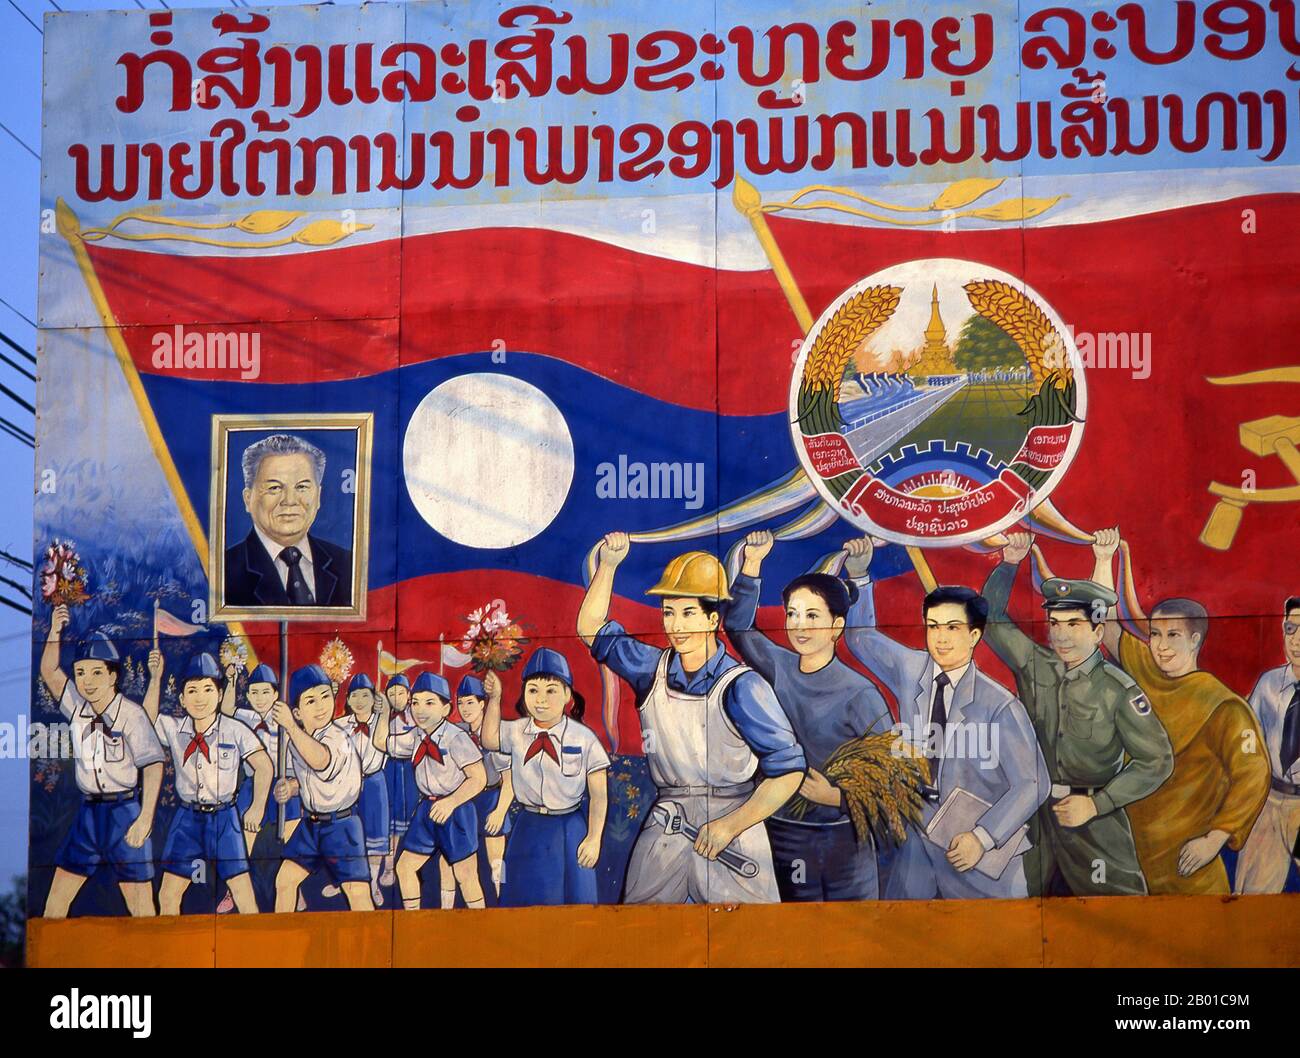 Laos: Children carry an image of Kaysone Phomvihane, President of Laos from 1991 until his death in 1992, Revolutionary Socialist realist-style political poster on the streets of Vientiane.  Kaysone Phomvihane (13 December 1920 - 21 November 1992) was the leader of the Lao People's Revolutionary Party from 1955. He served as the first Prime Minister of the Lao People's Democratic Republic from 1975 to 1991 and then as President from 1991 until his death in 1992. Stock Photo